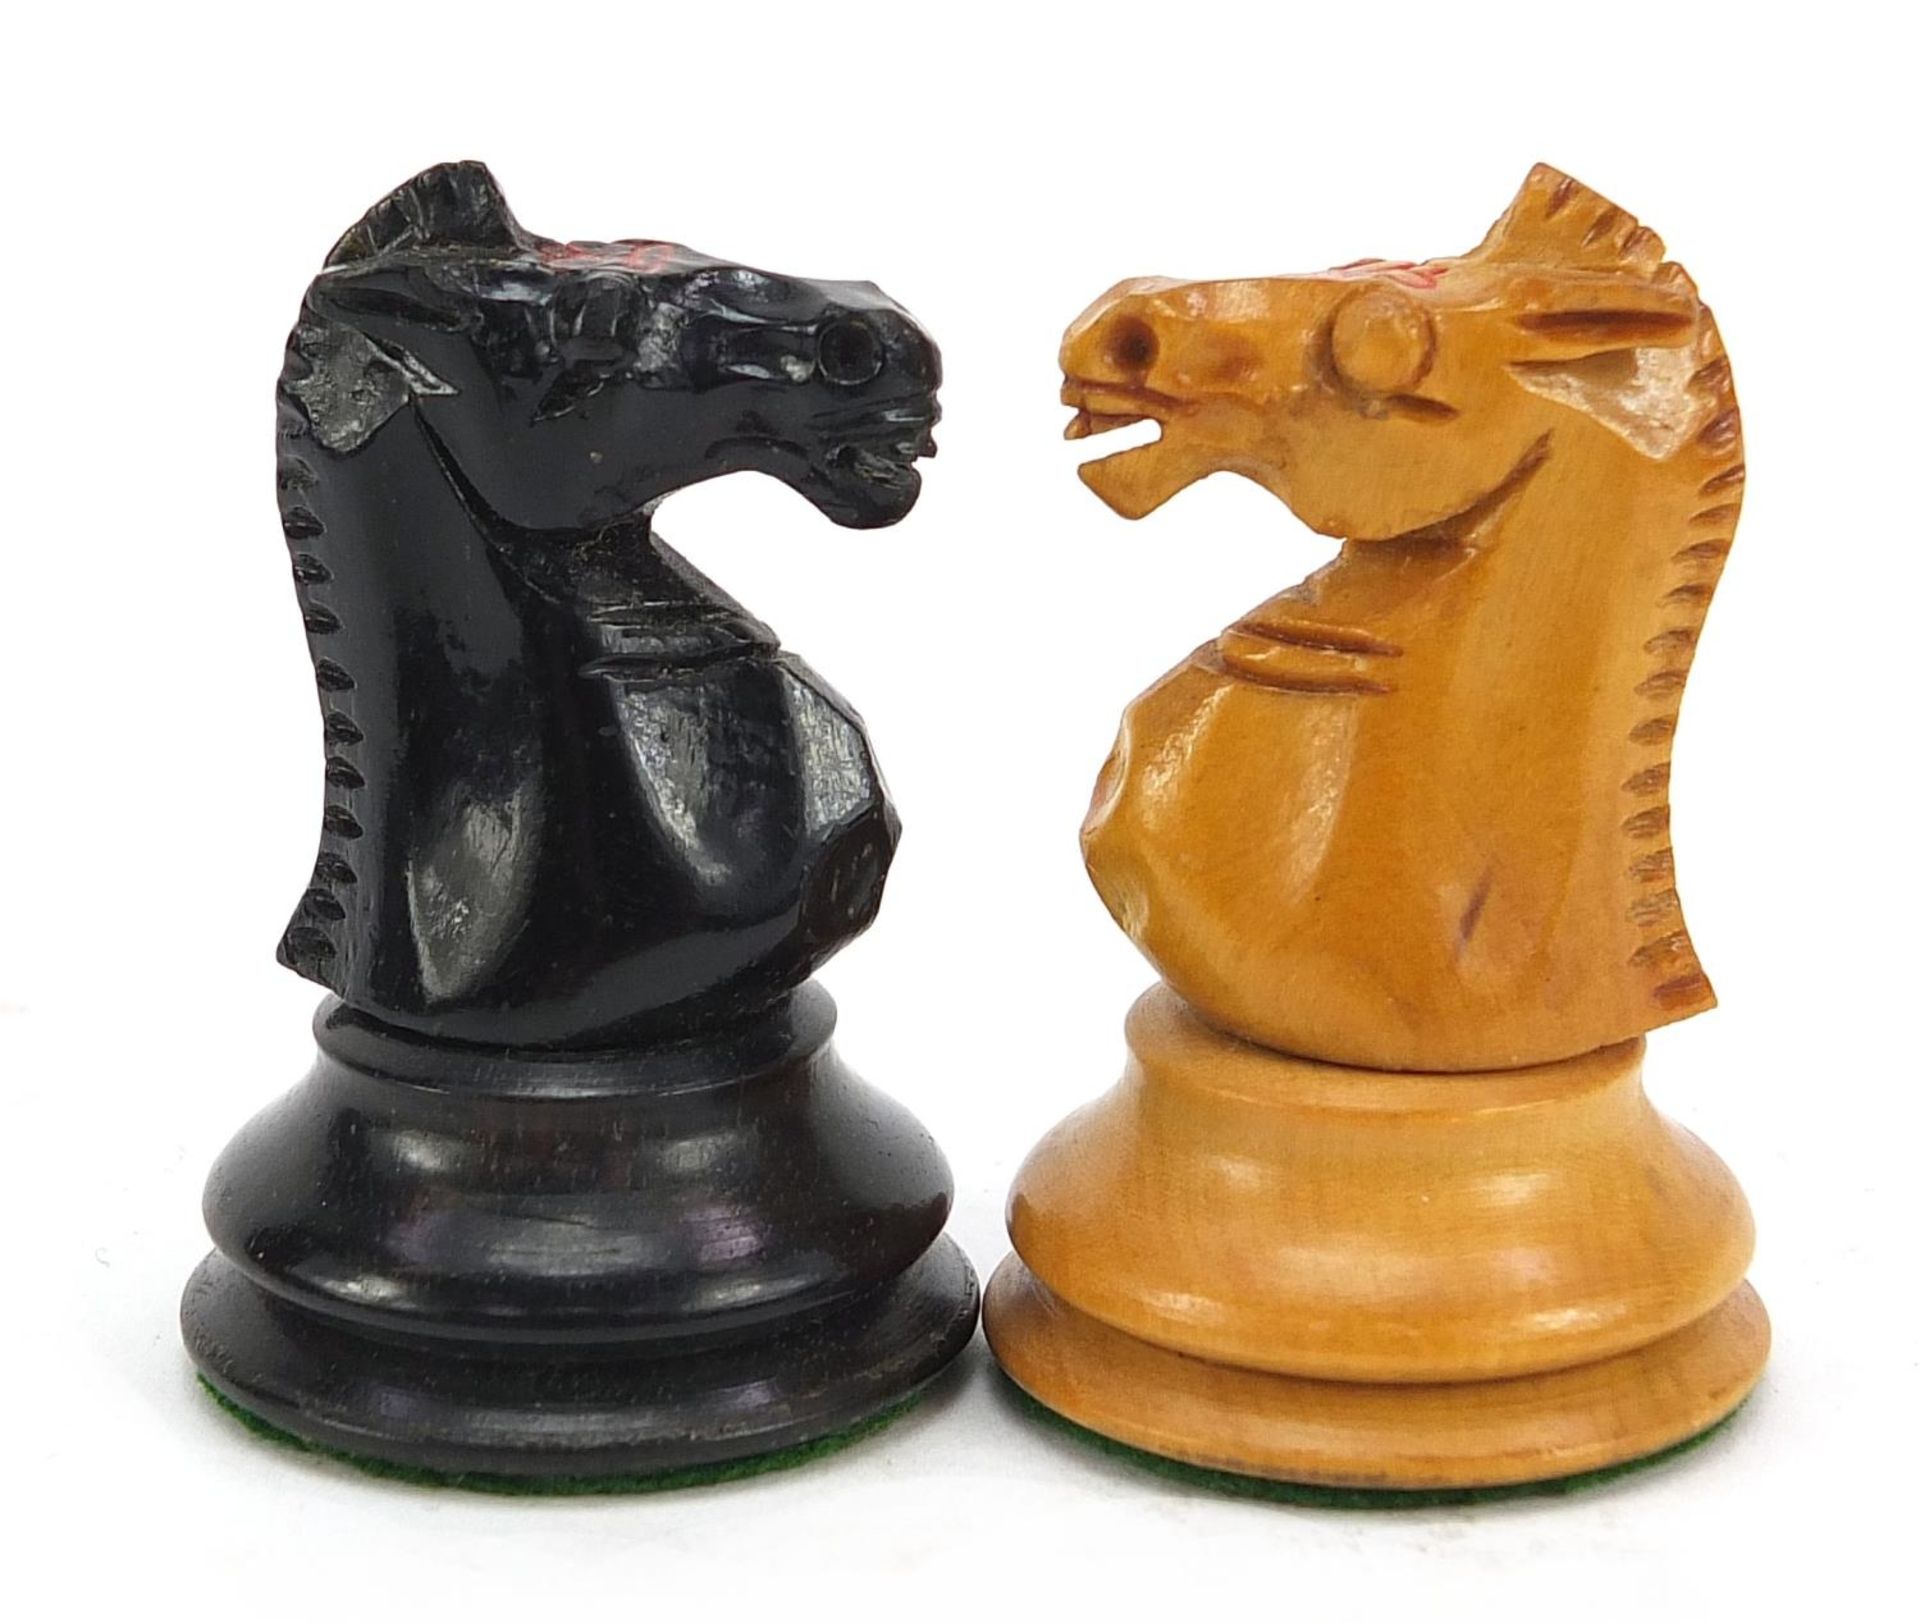 Good boxwood and ebony Staunton pattern chess set, possibly Jaques, the largest pieces each 7.5cm - Image 4 of 6